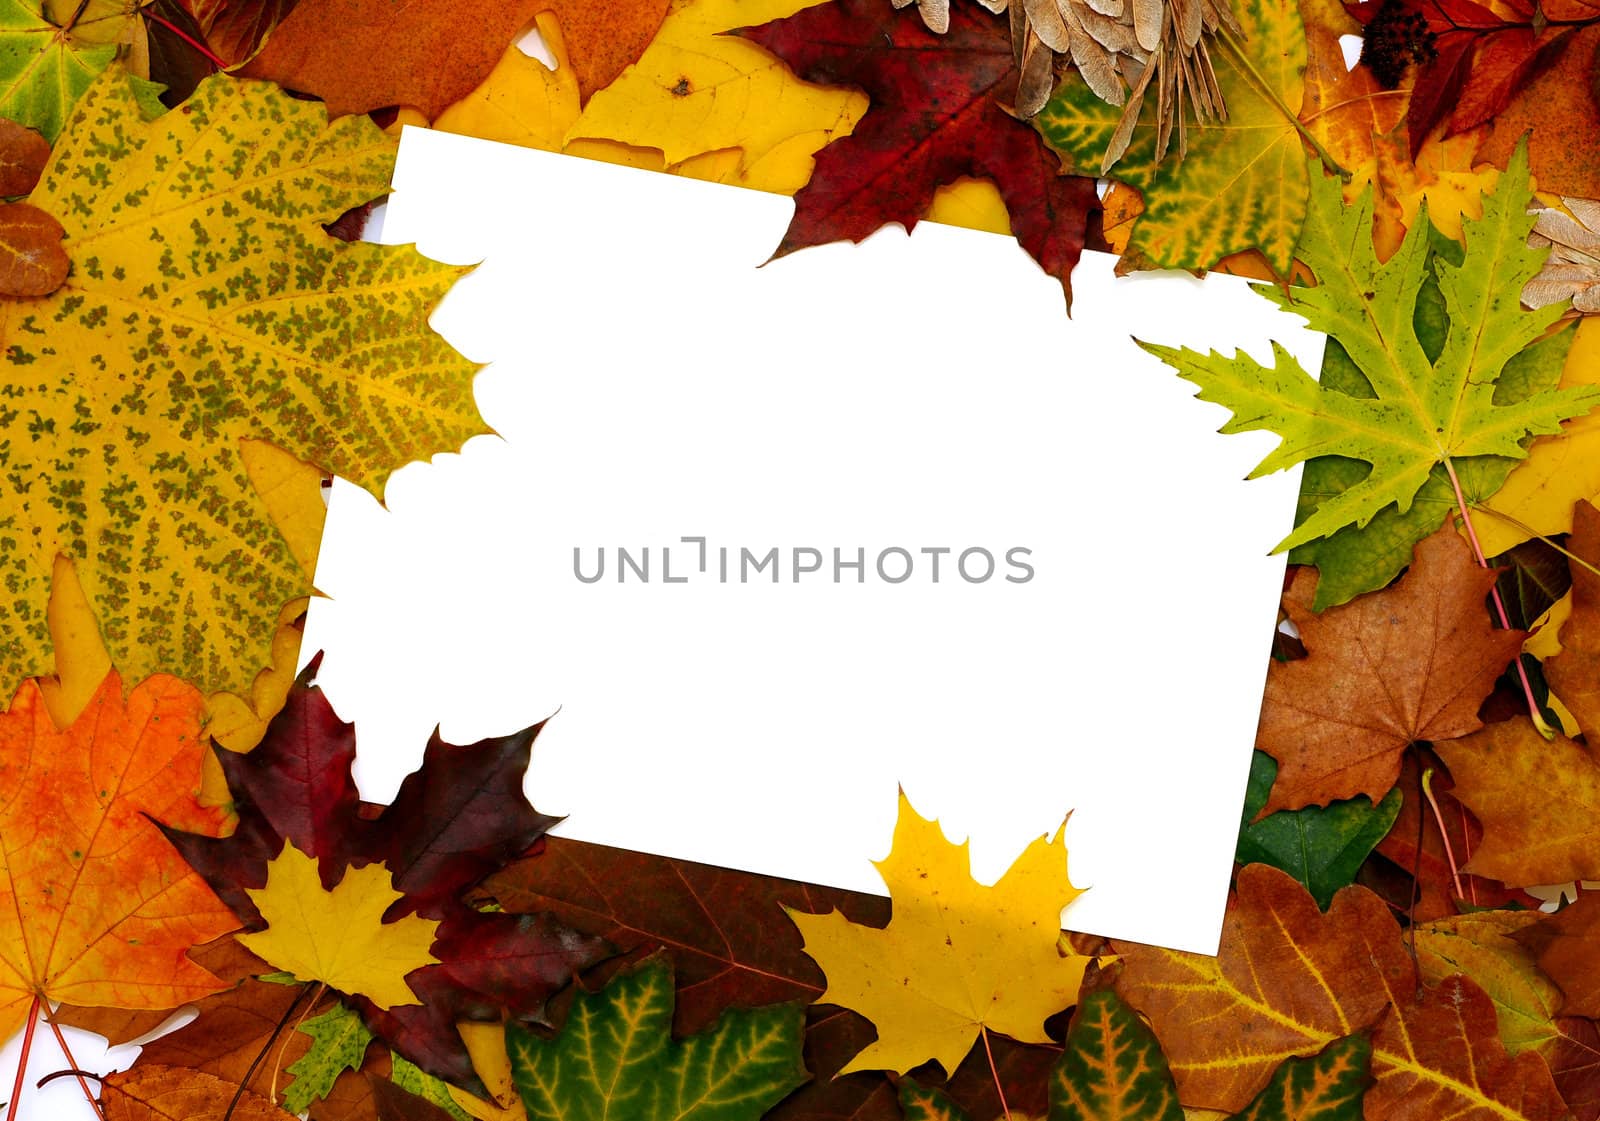 Colorful frame of fallen autumn leaves with text message by DNKSTUDIO